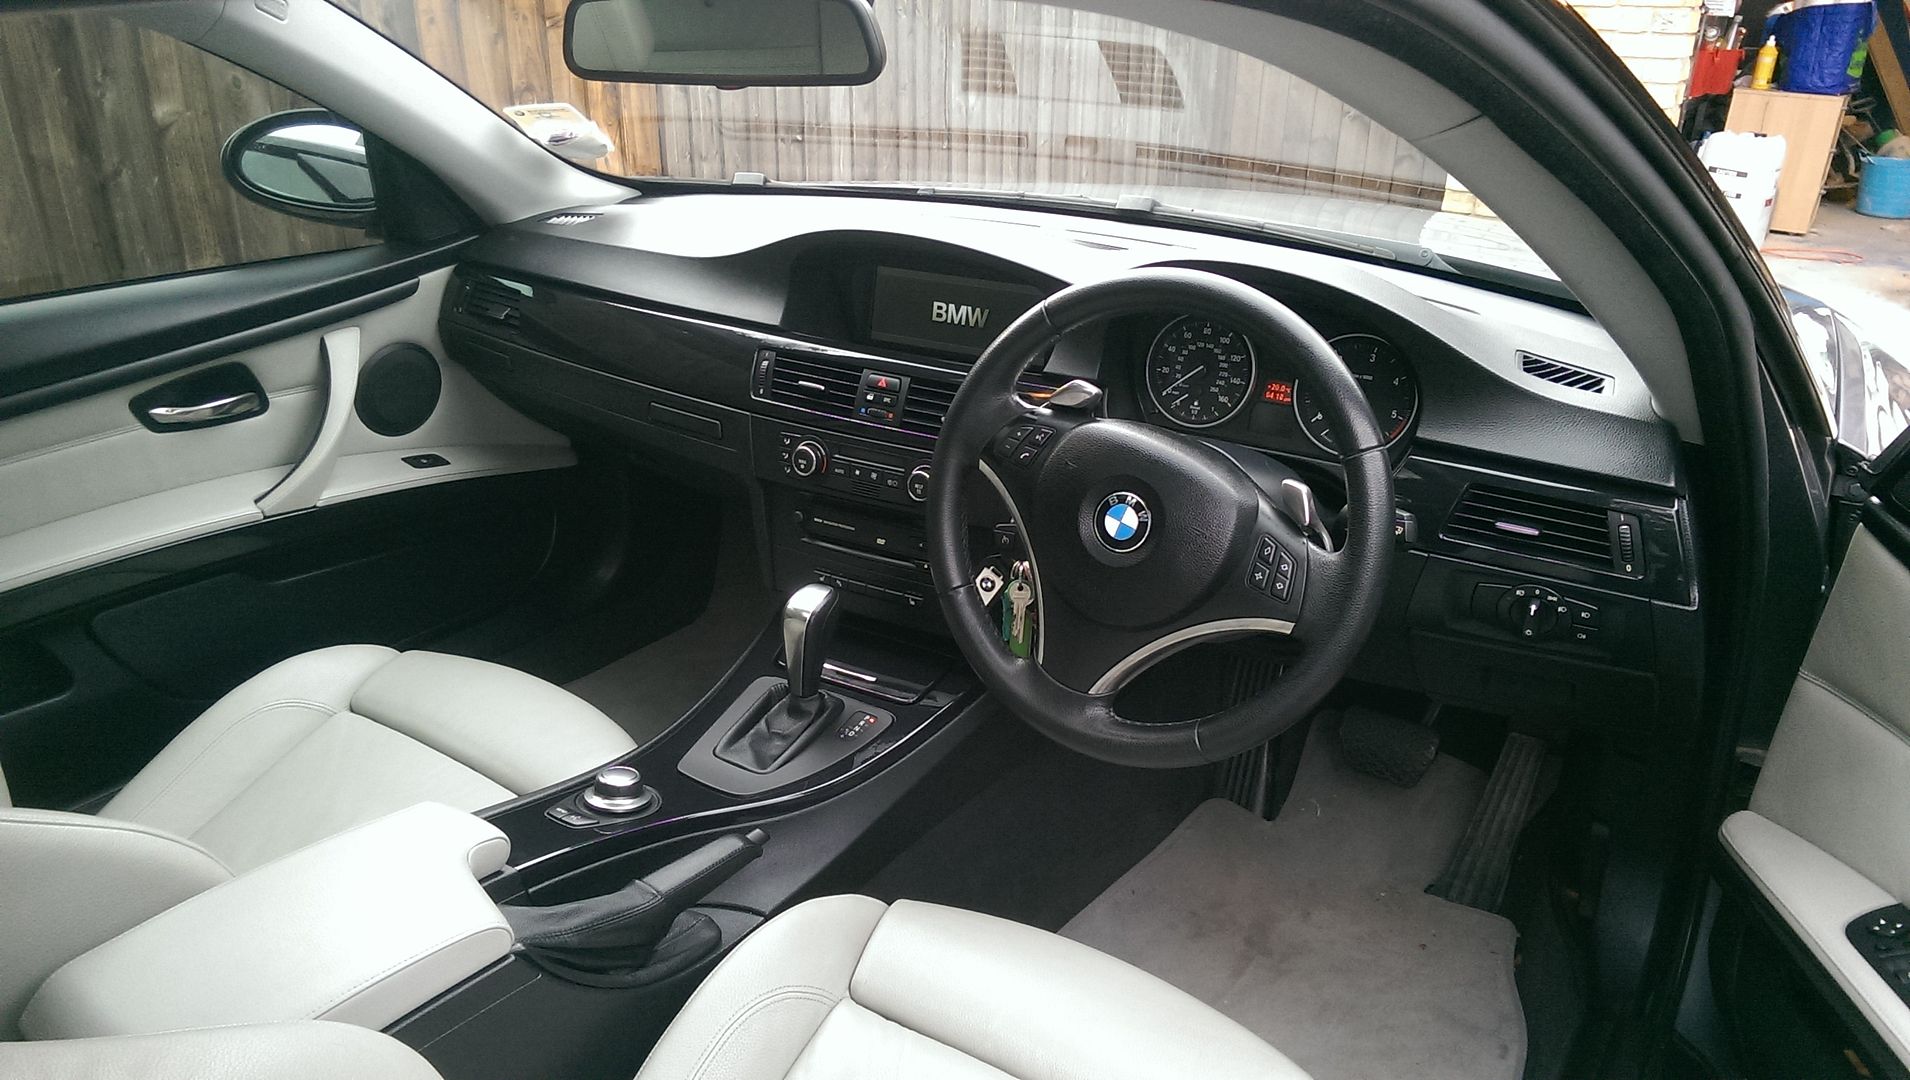 E92 Interior Swap Looking For Coral Red Bmw 3 Series